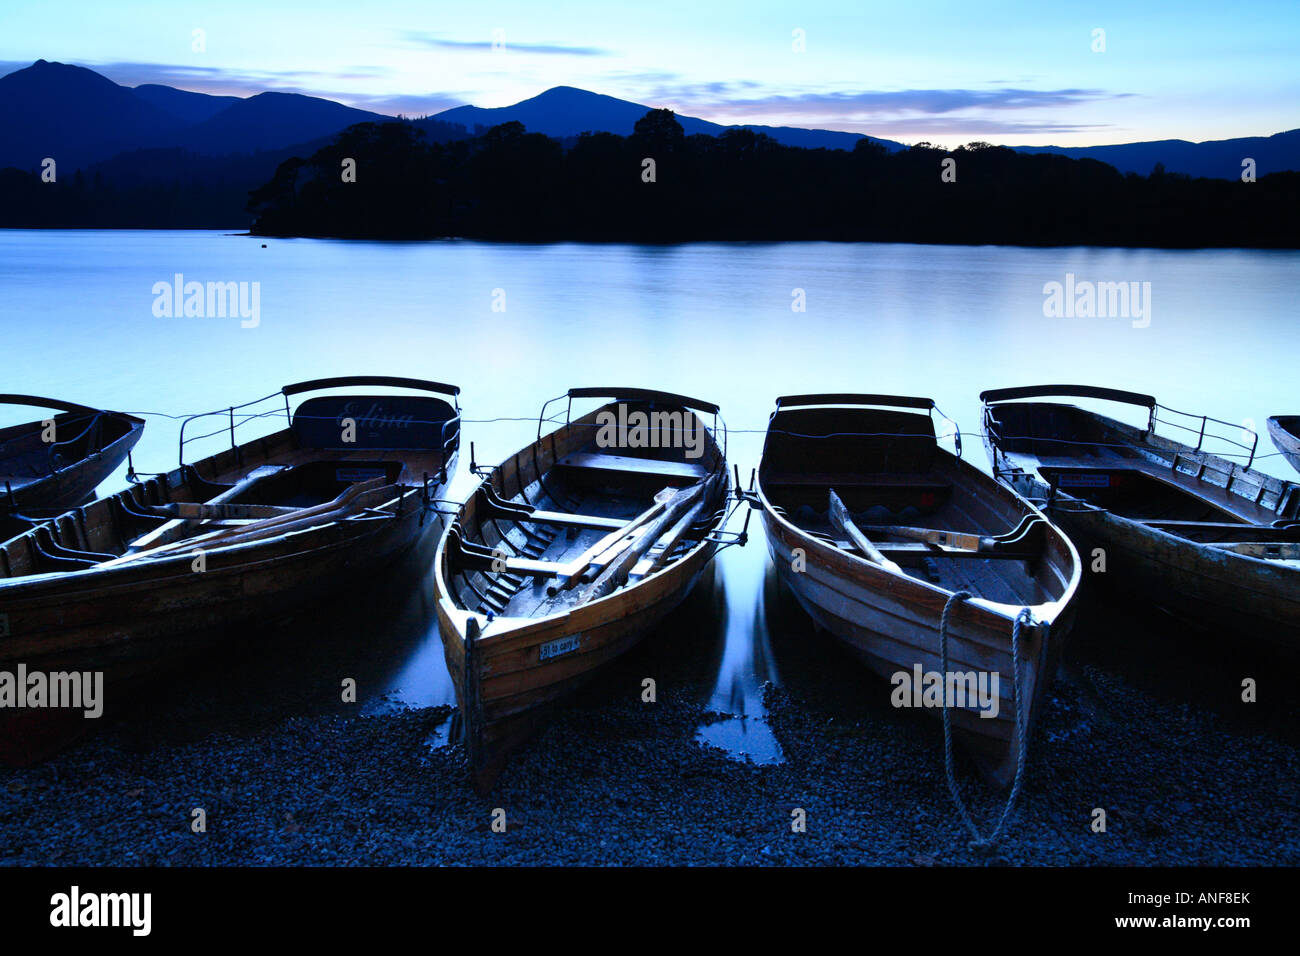 'Rowing boats' on 'Derwent water' at Crow Park, Keswick, Lake District. Stock Photo